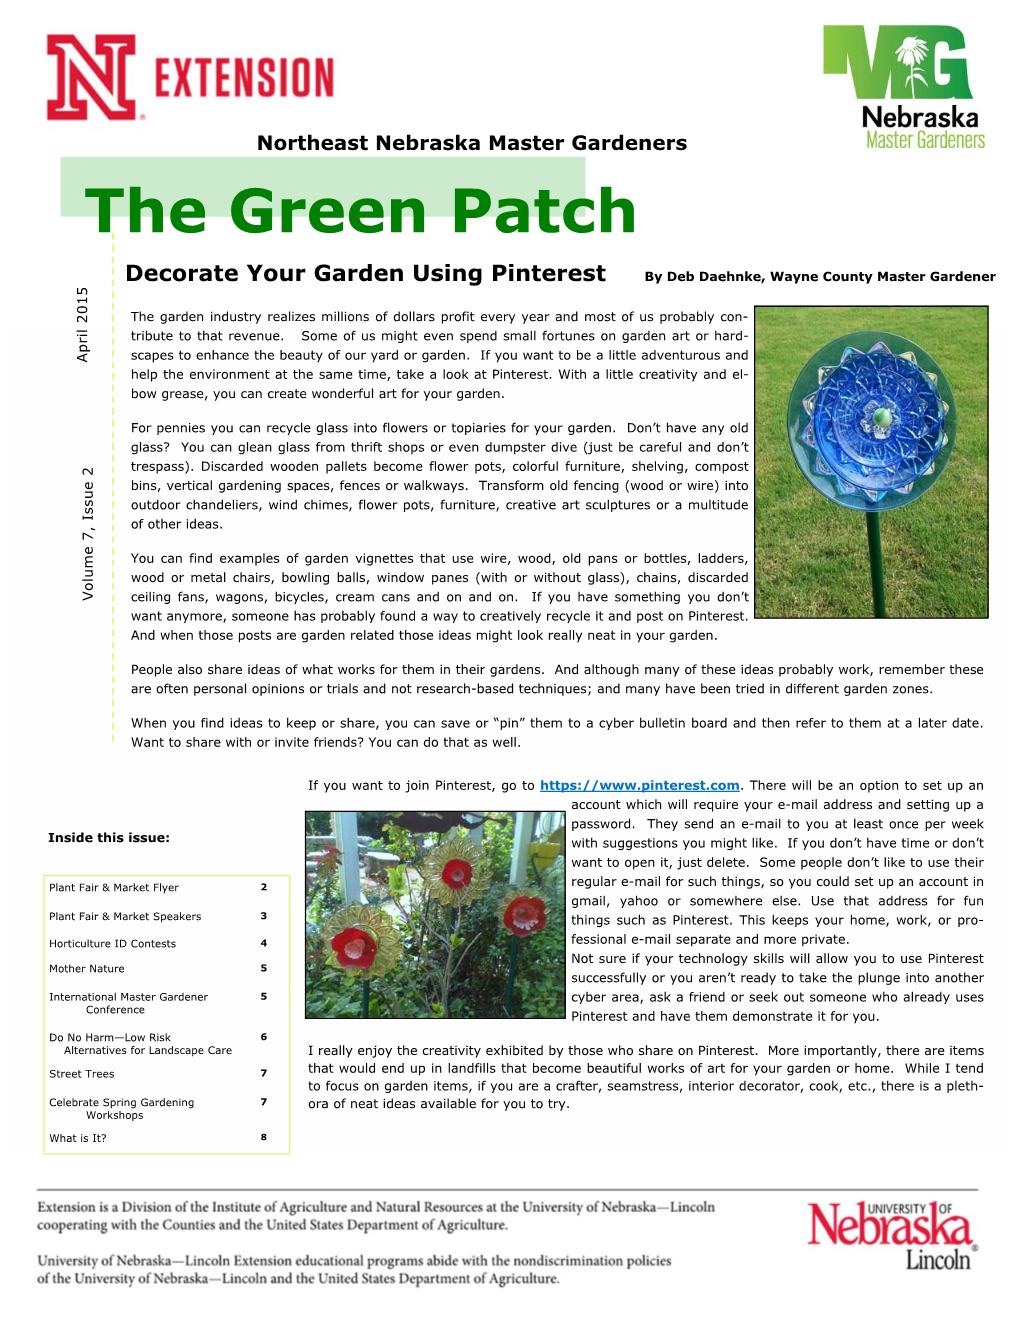 The Green Patch